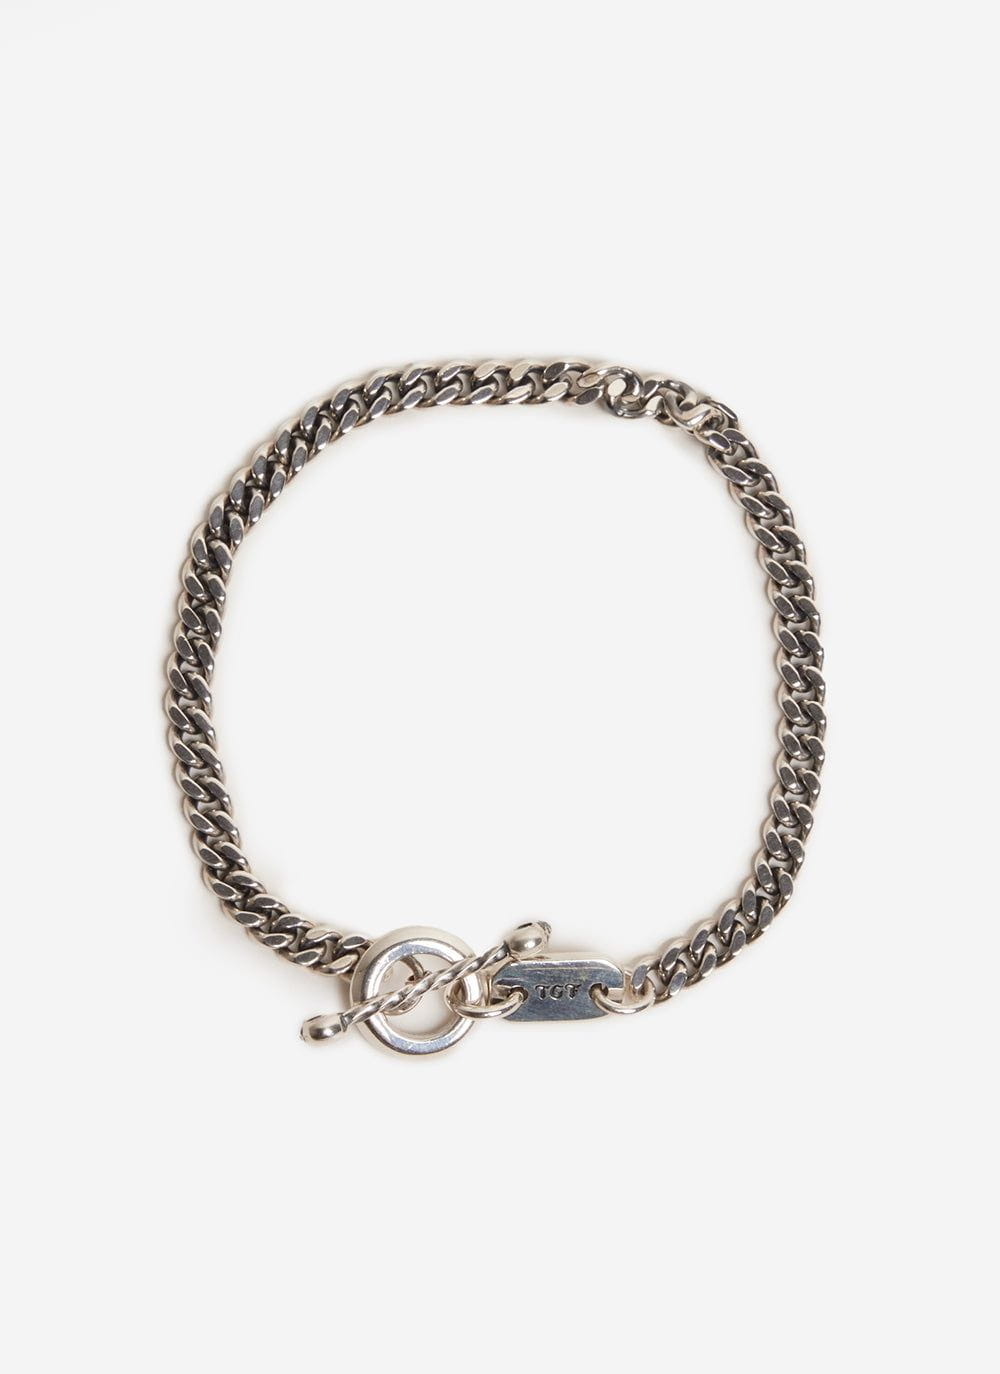 The Curb Your Enthusiasm Bracelet | Sterling Silver & Percival Menswear